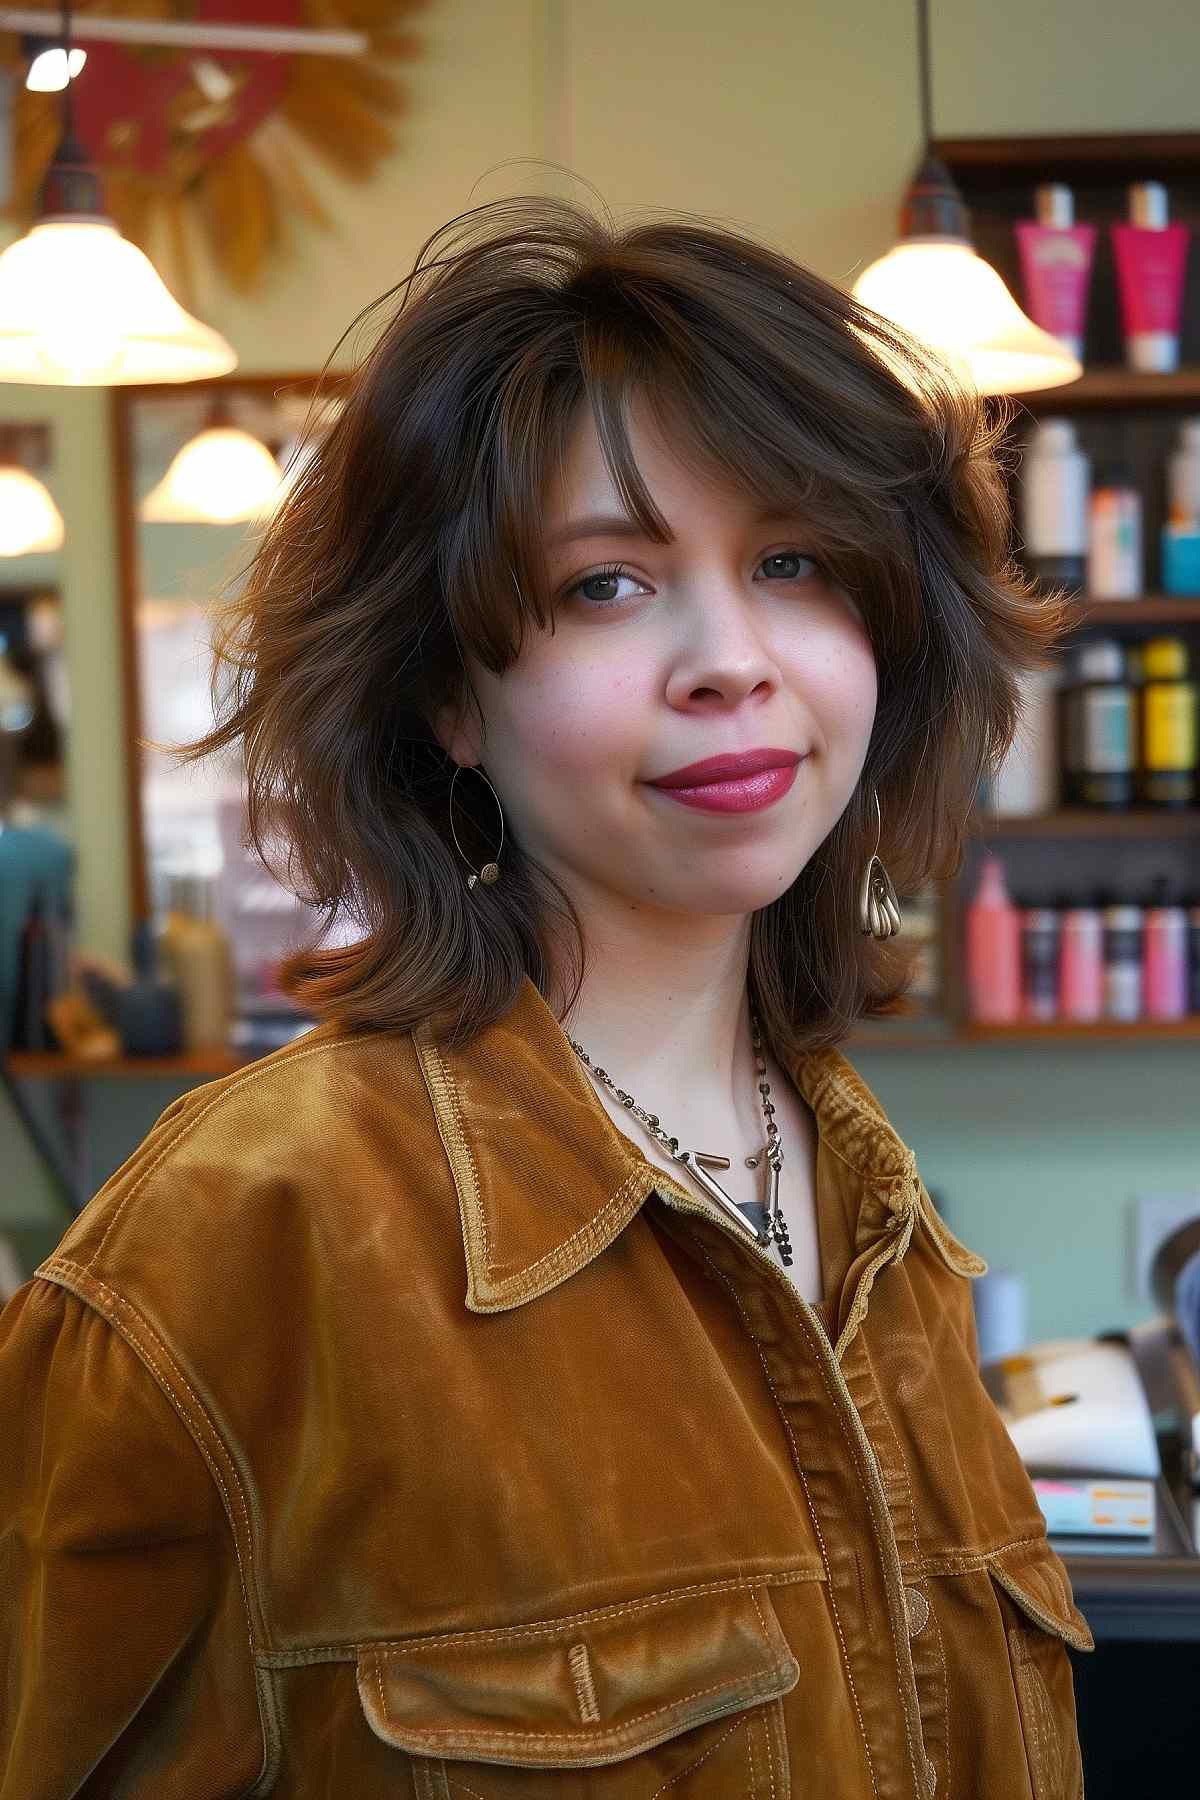 Woman showcasing a 70s-influenced wolf cut for straight hair, with layered and feathered ends at collarbone length.